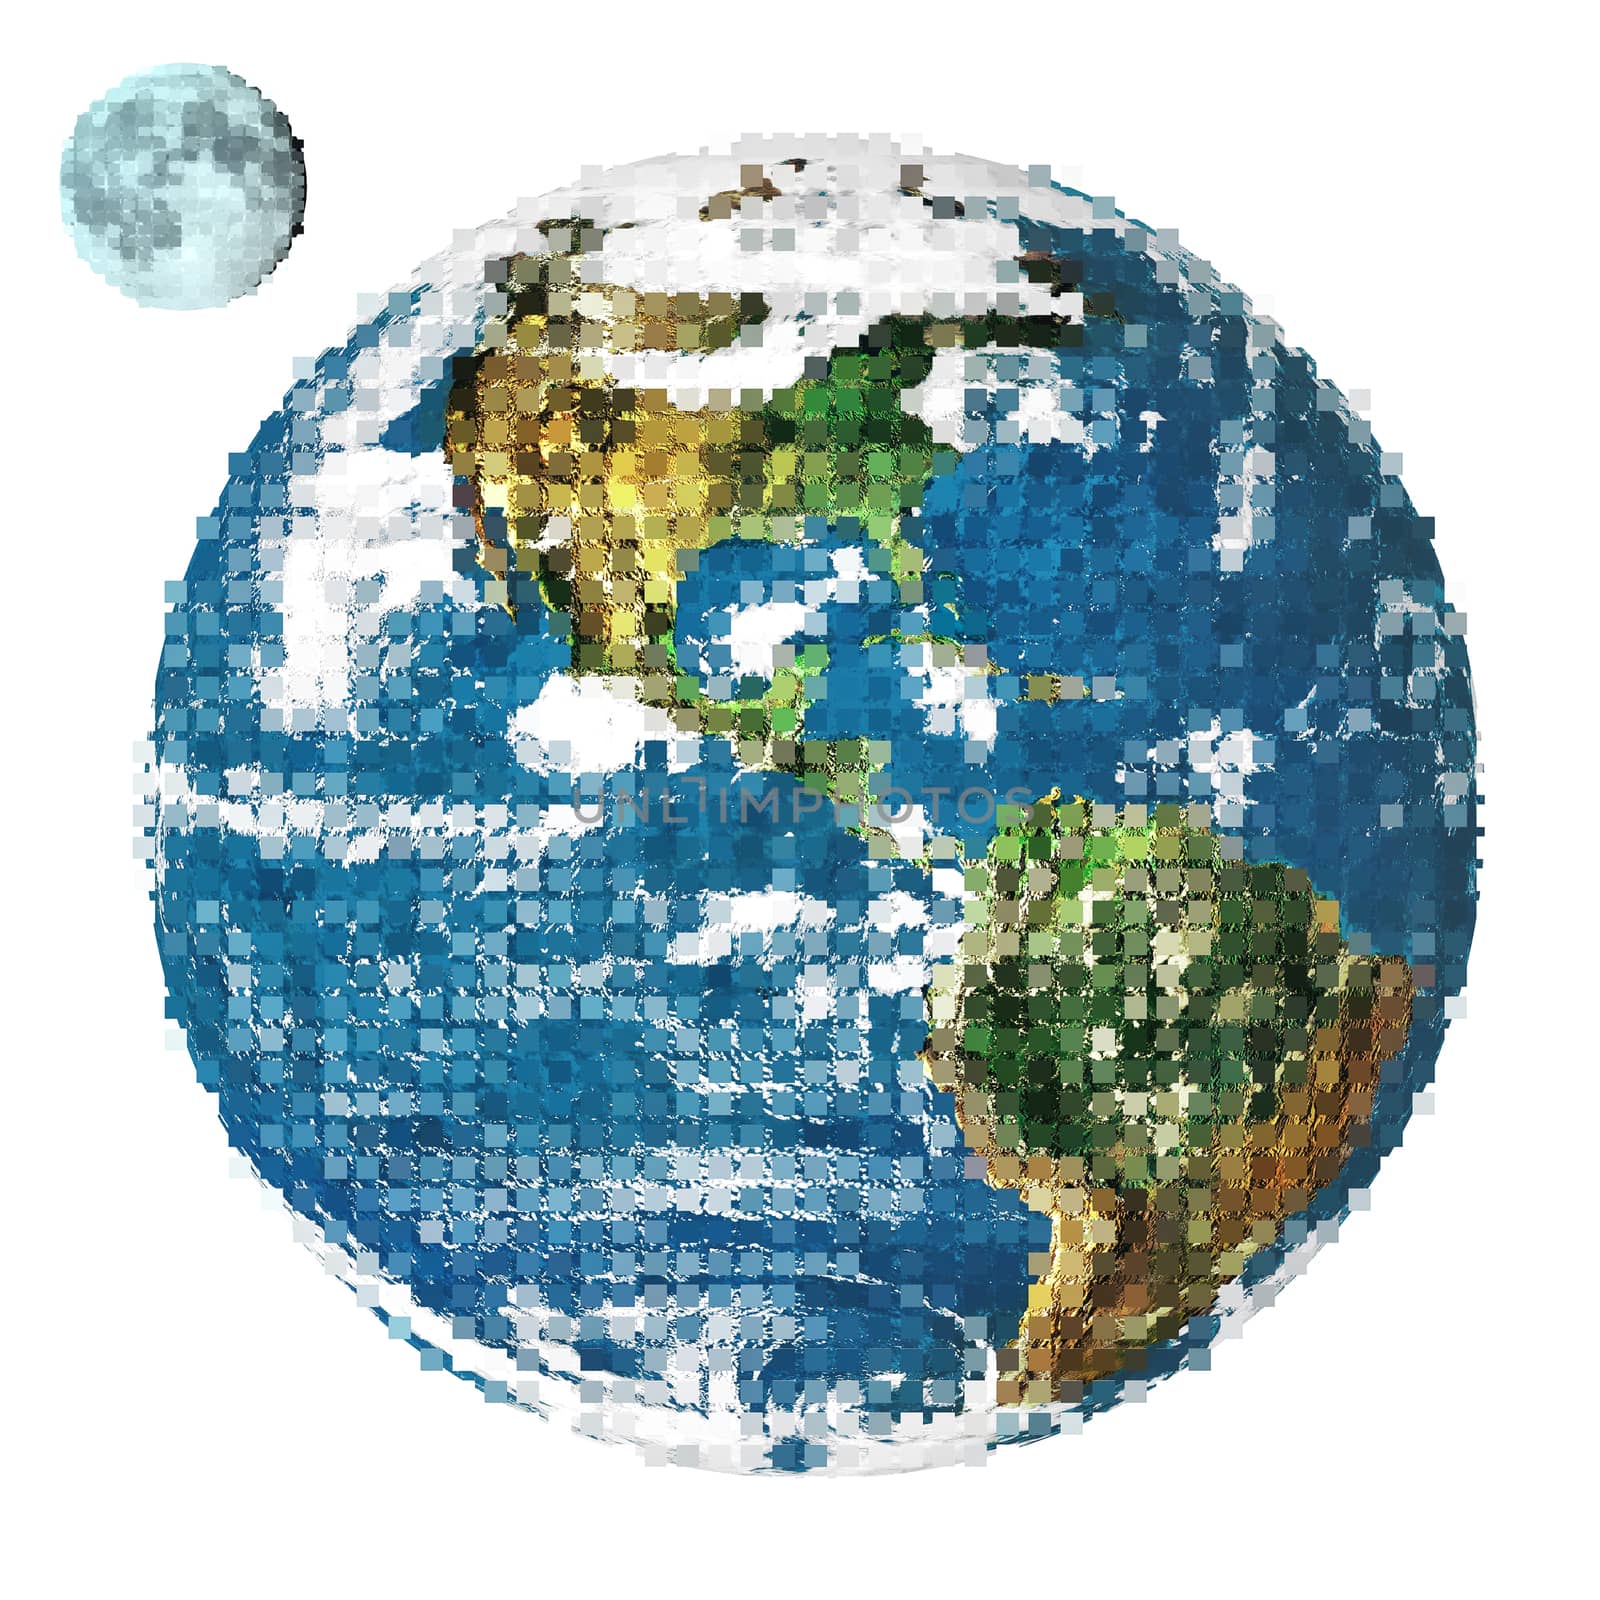 Styalized image of the Earth and Lunar moon created from Images courtesy NASA.